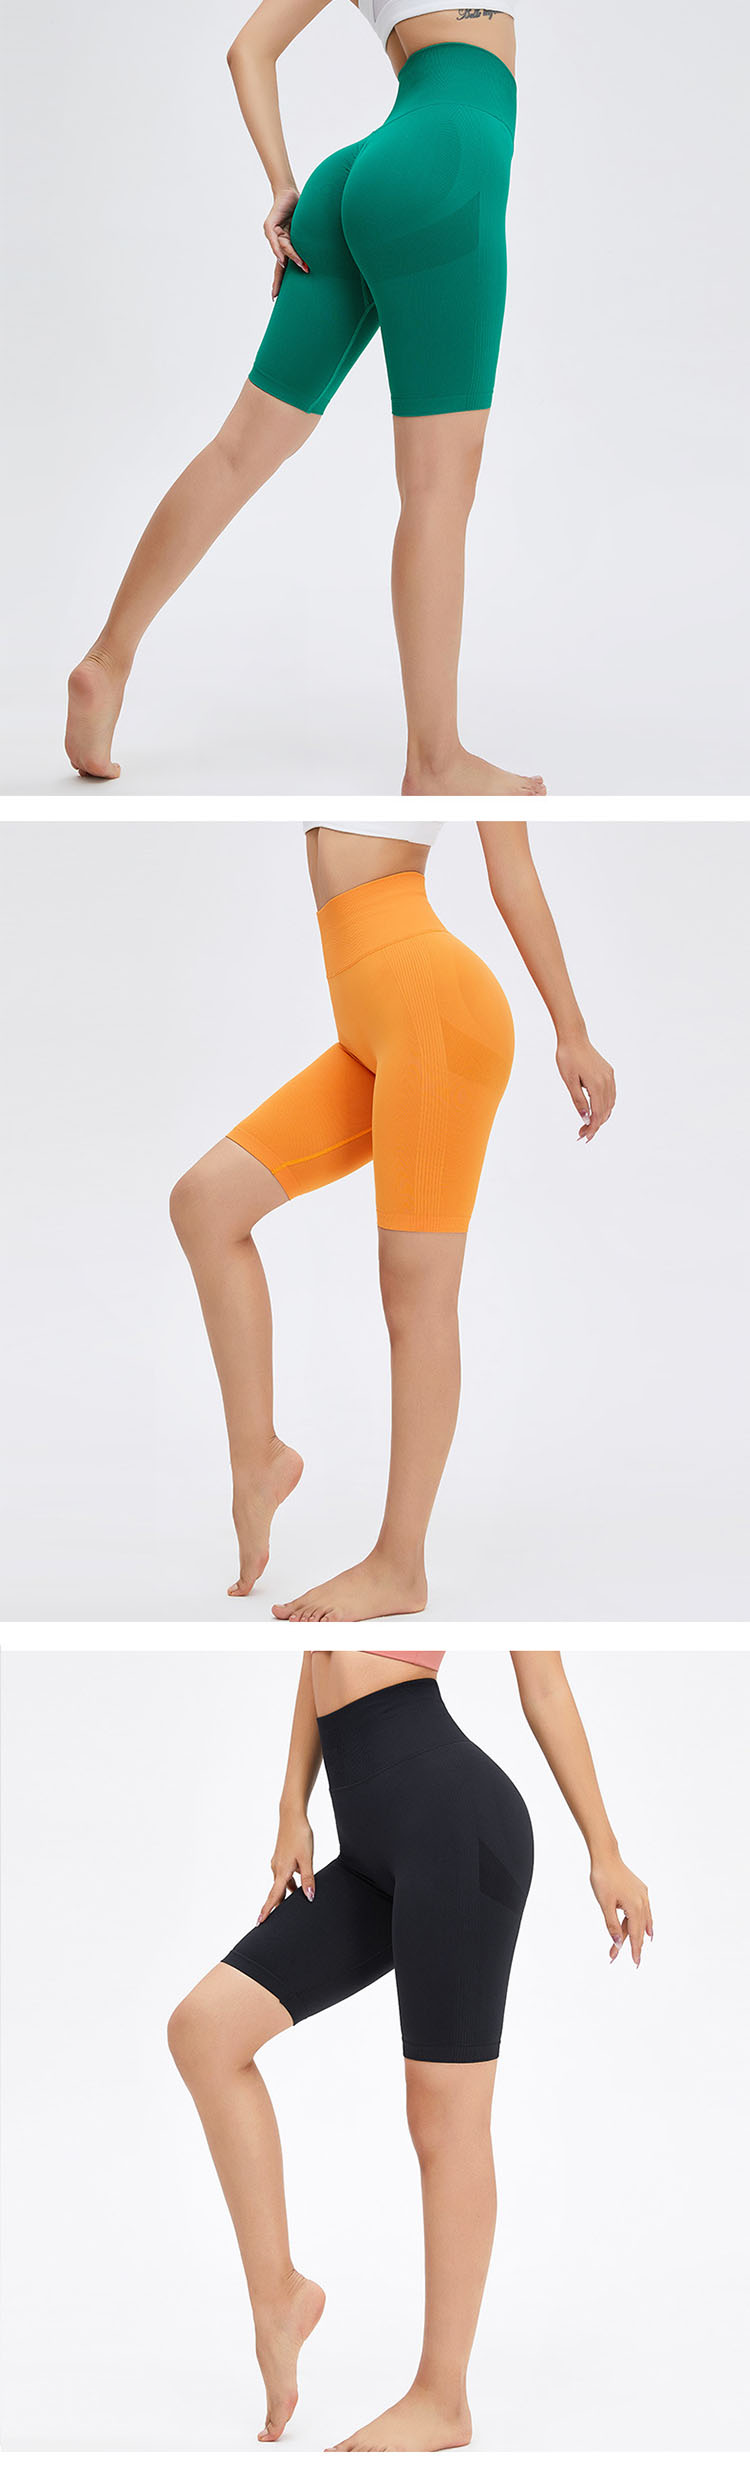 The hip-lifting design is breathable and moisture-wicking to create a sexy buttocks.